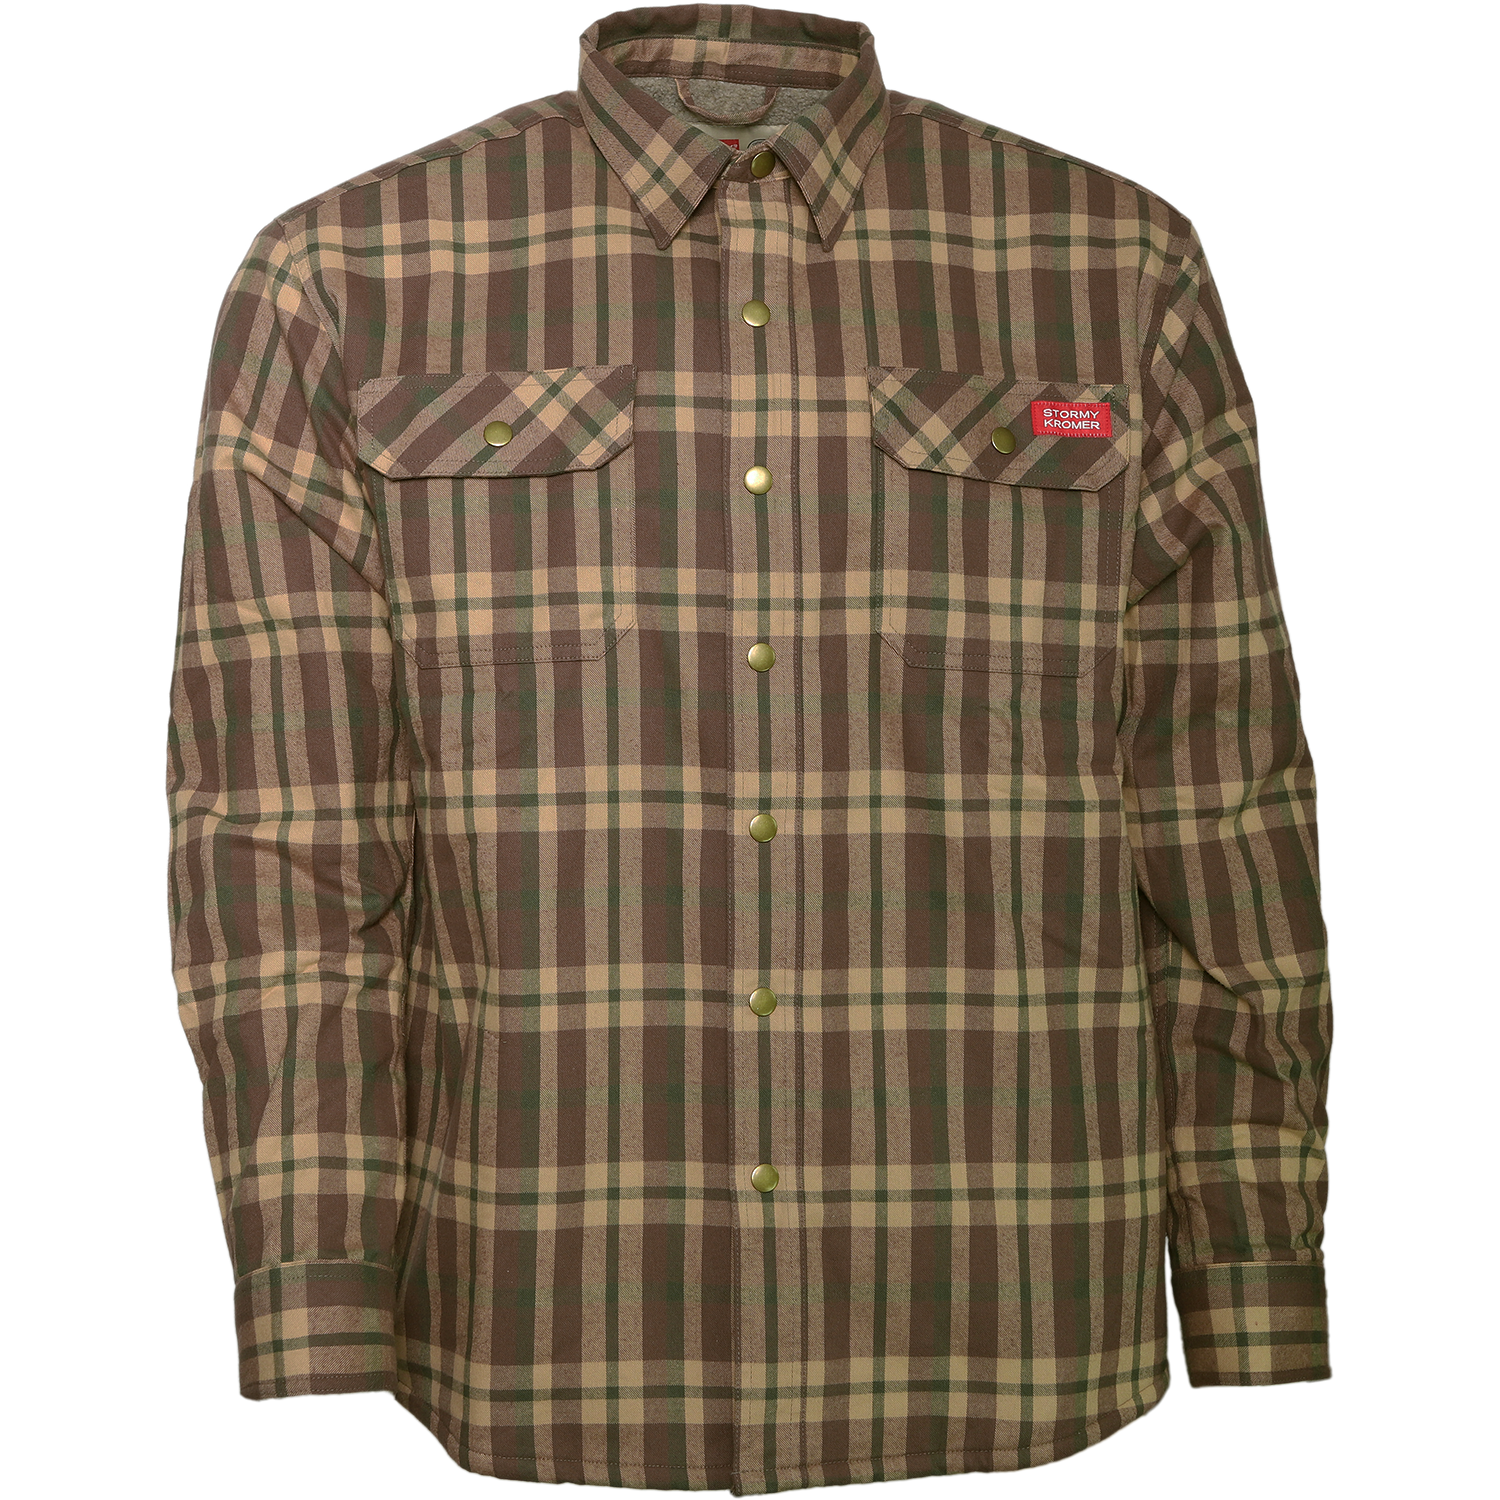 Picture of Stormy Kromer 52460 The Camp Shirt Jack